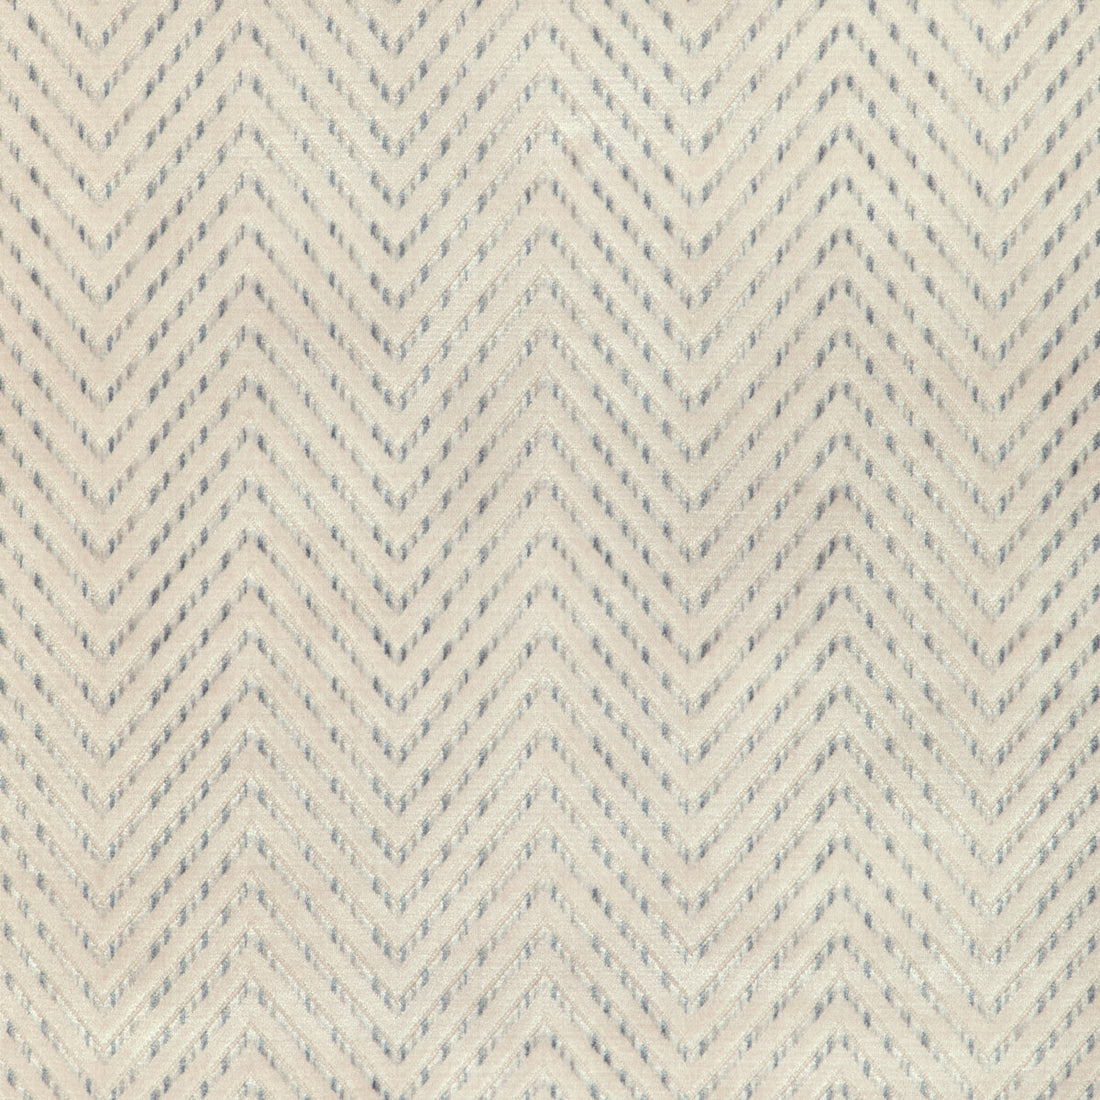 Dunand fabric in steel color - pattern 36969.135.0 - by Kravet Basics in the Mid-Century Modern collection